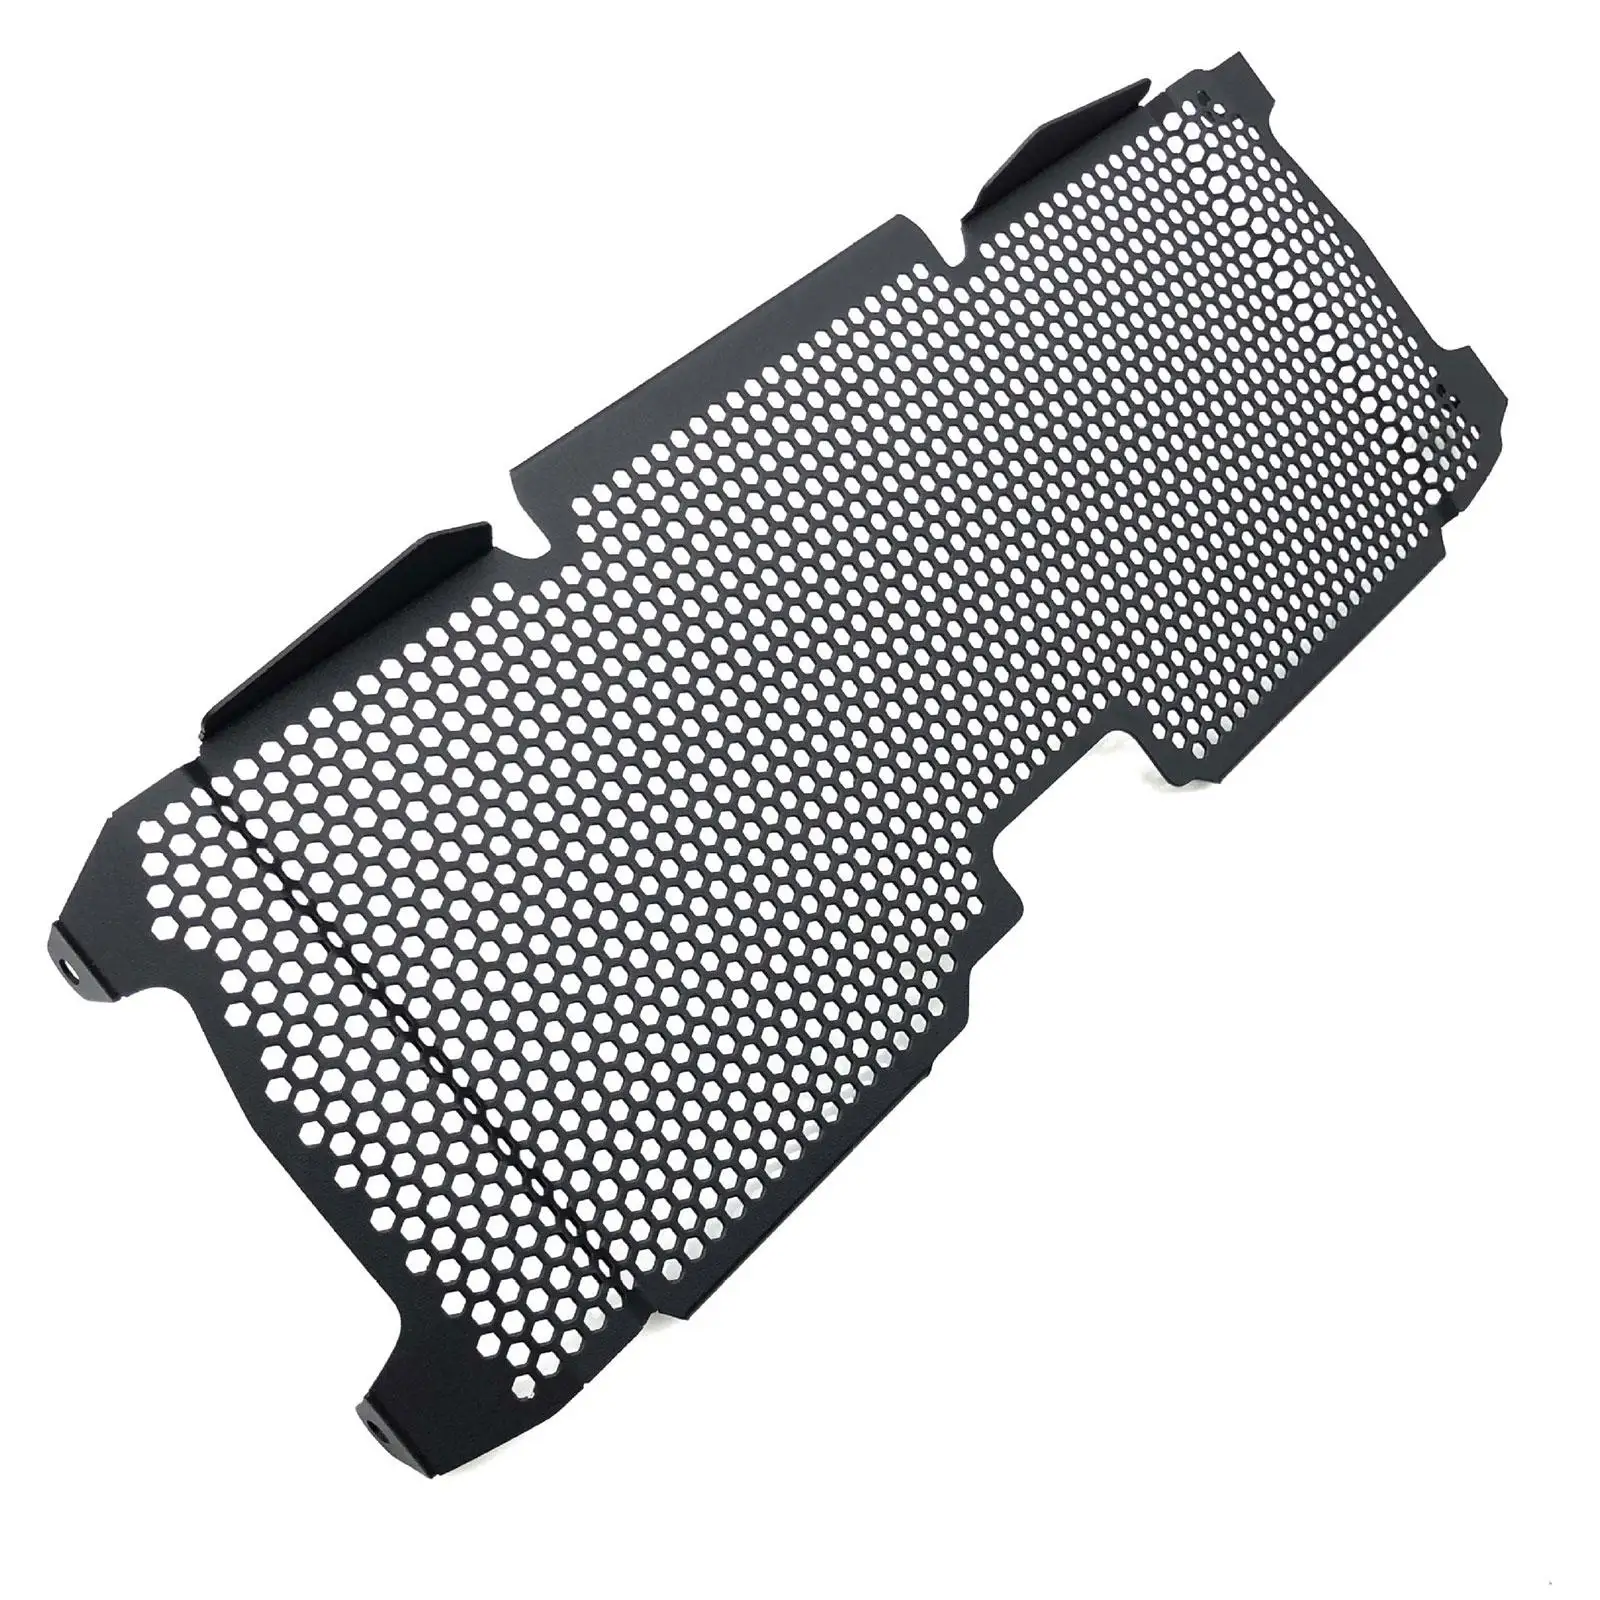 Radiator Grille Guard Protector Grill Cover Trim Mesh for BMW R1200RS